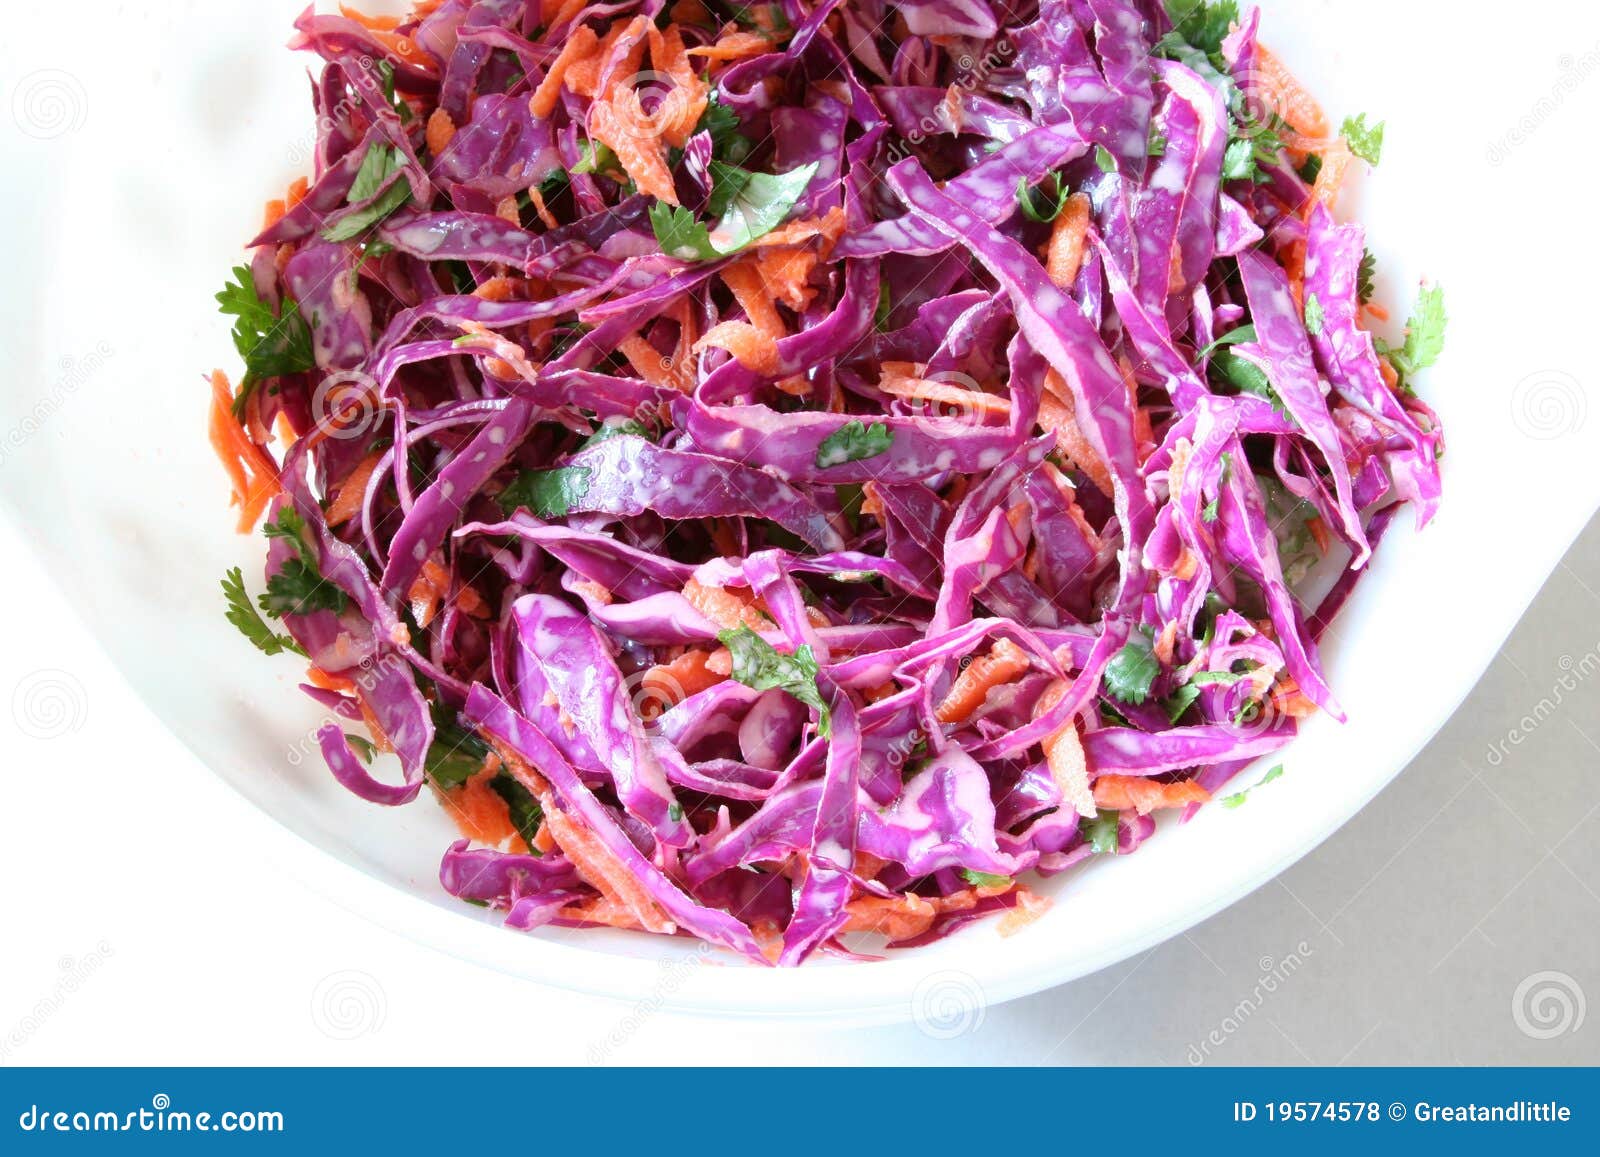 red cabbage cole slaw